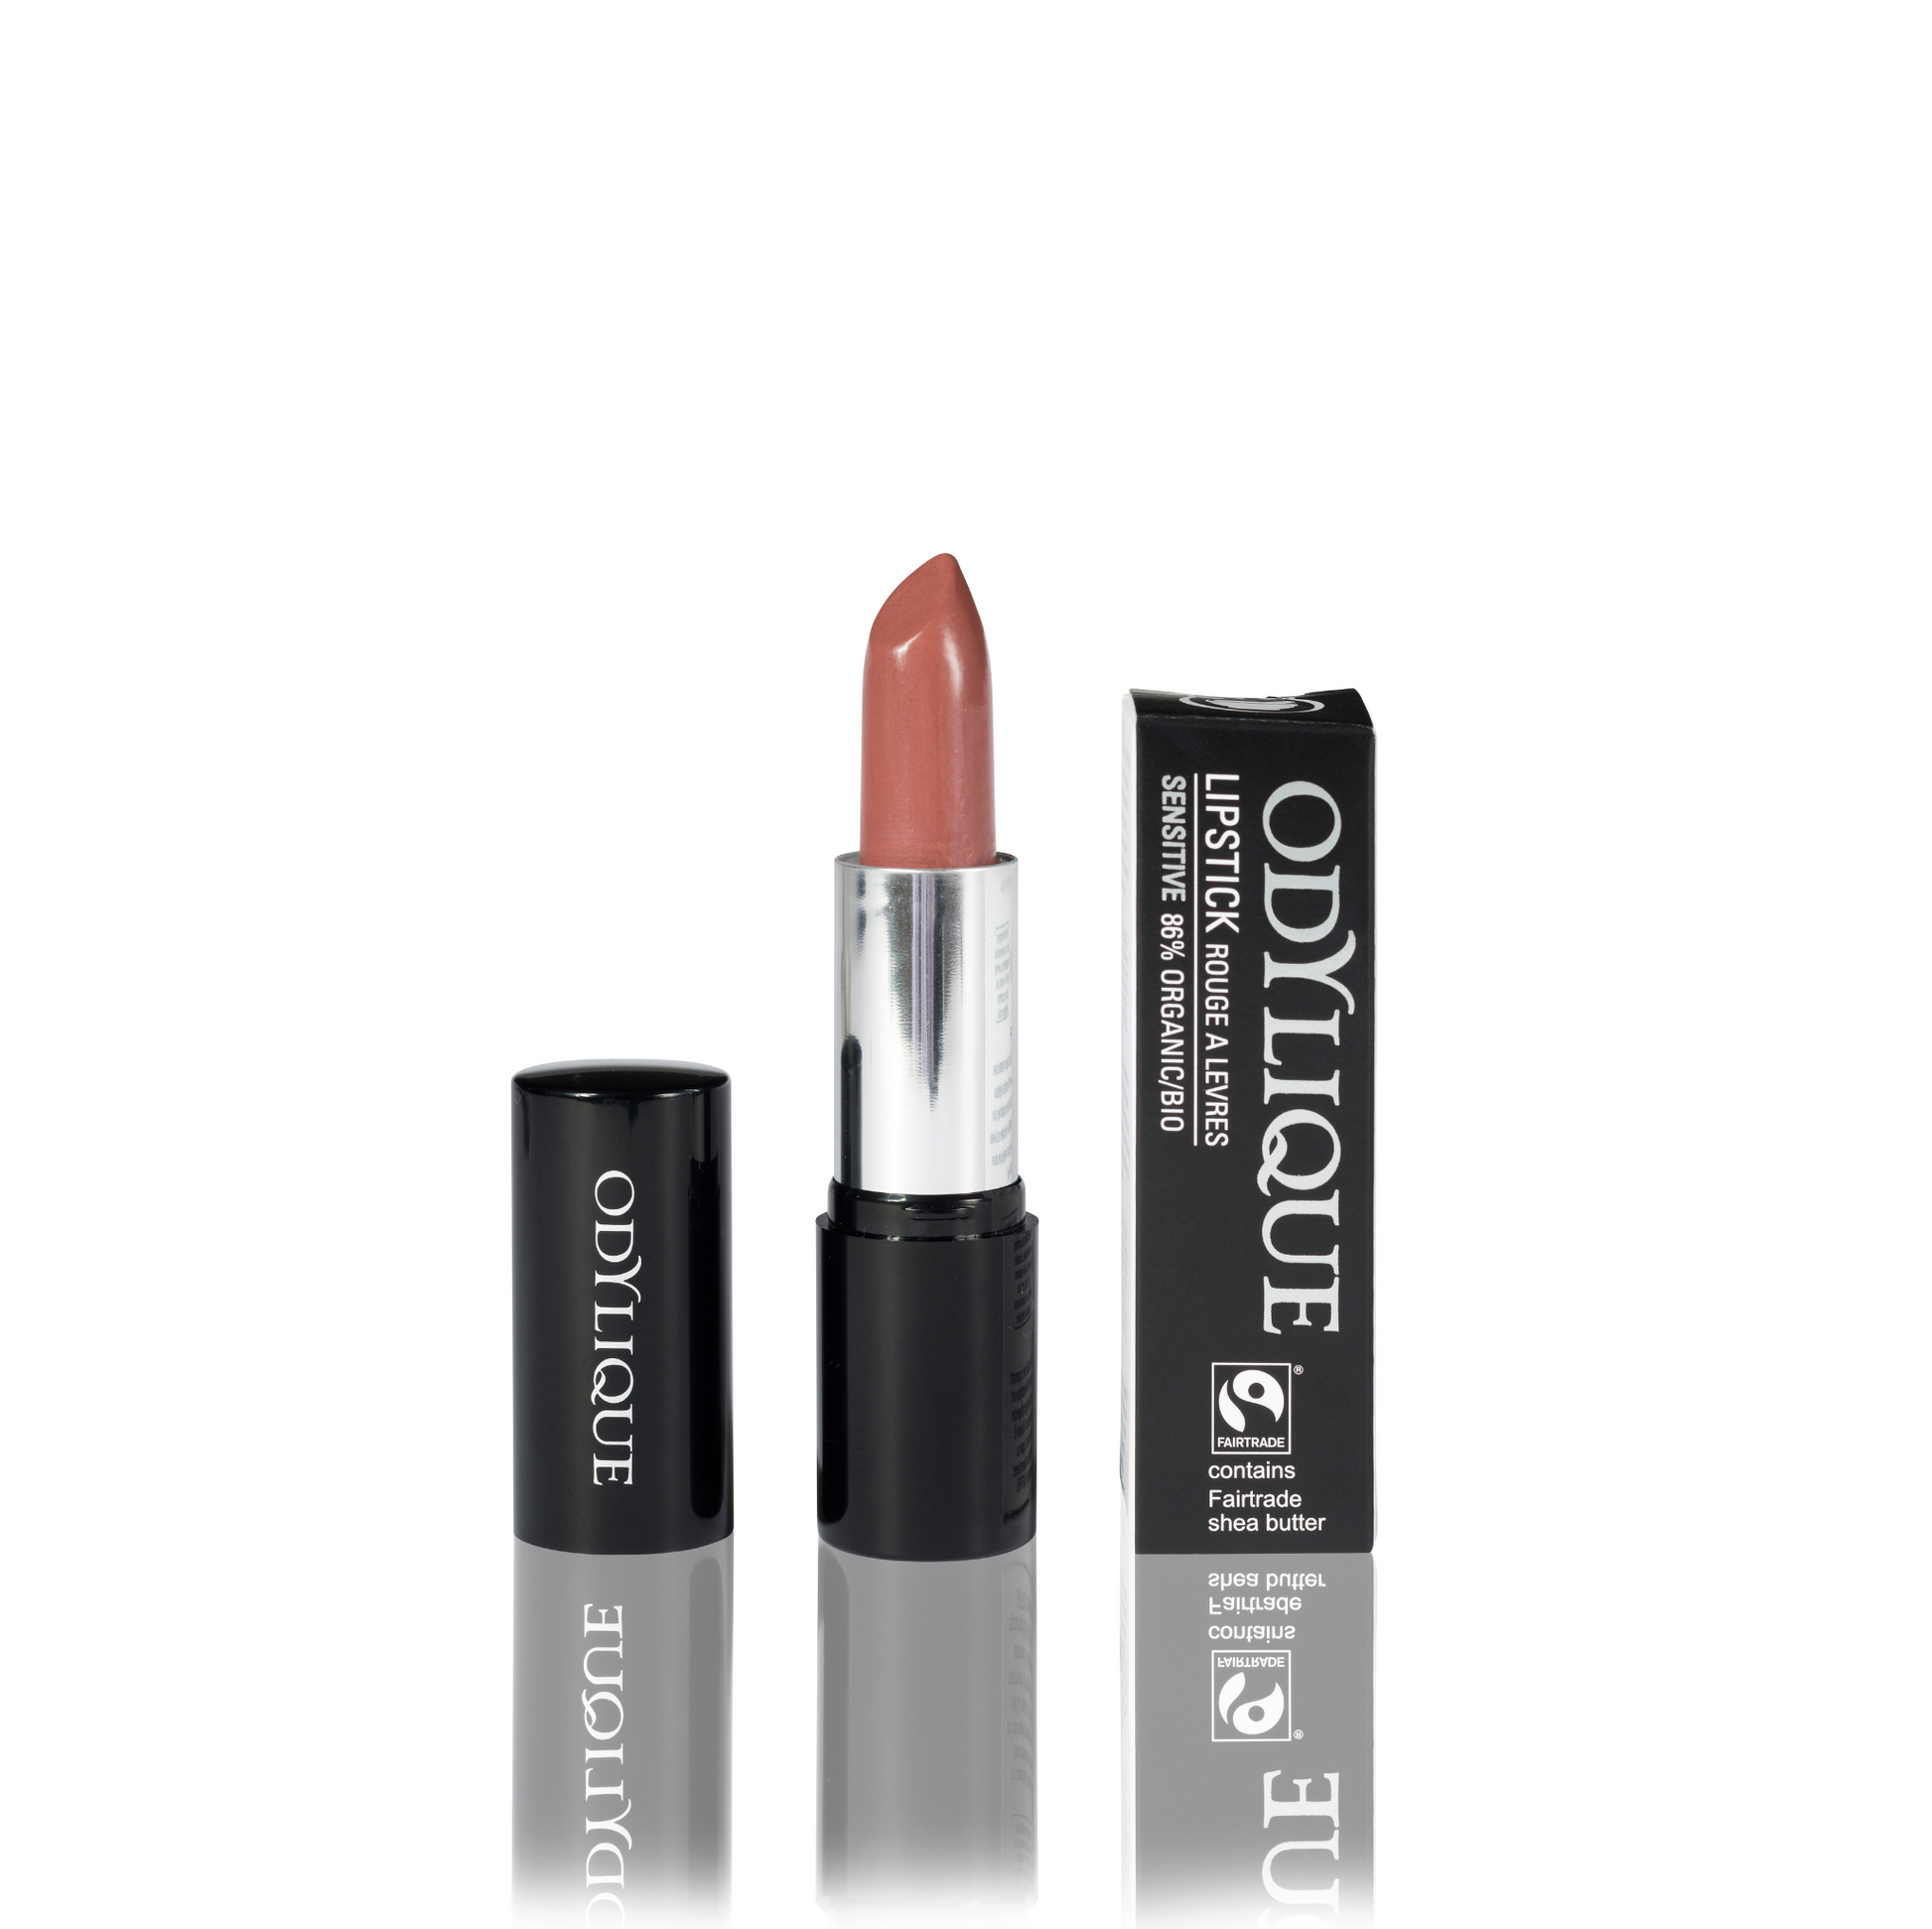 Odylique lipstick in Praline (nude natural brown) partially twisted up from its black tube, positioned next to its packaging on a reflective surface.